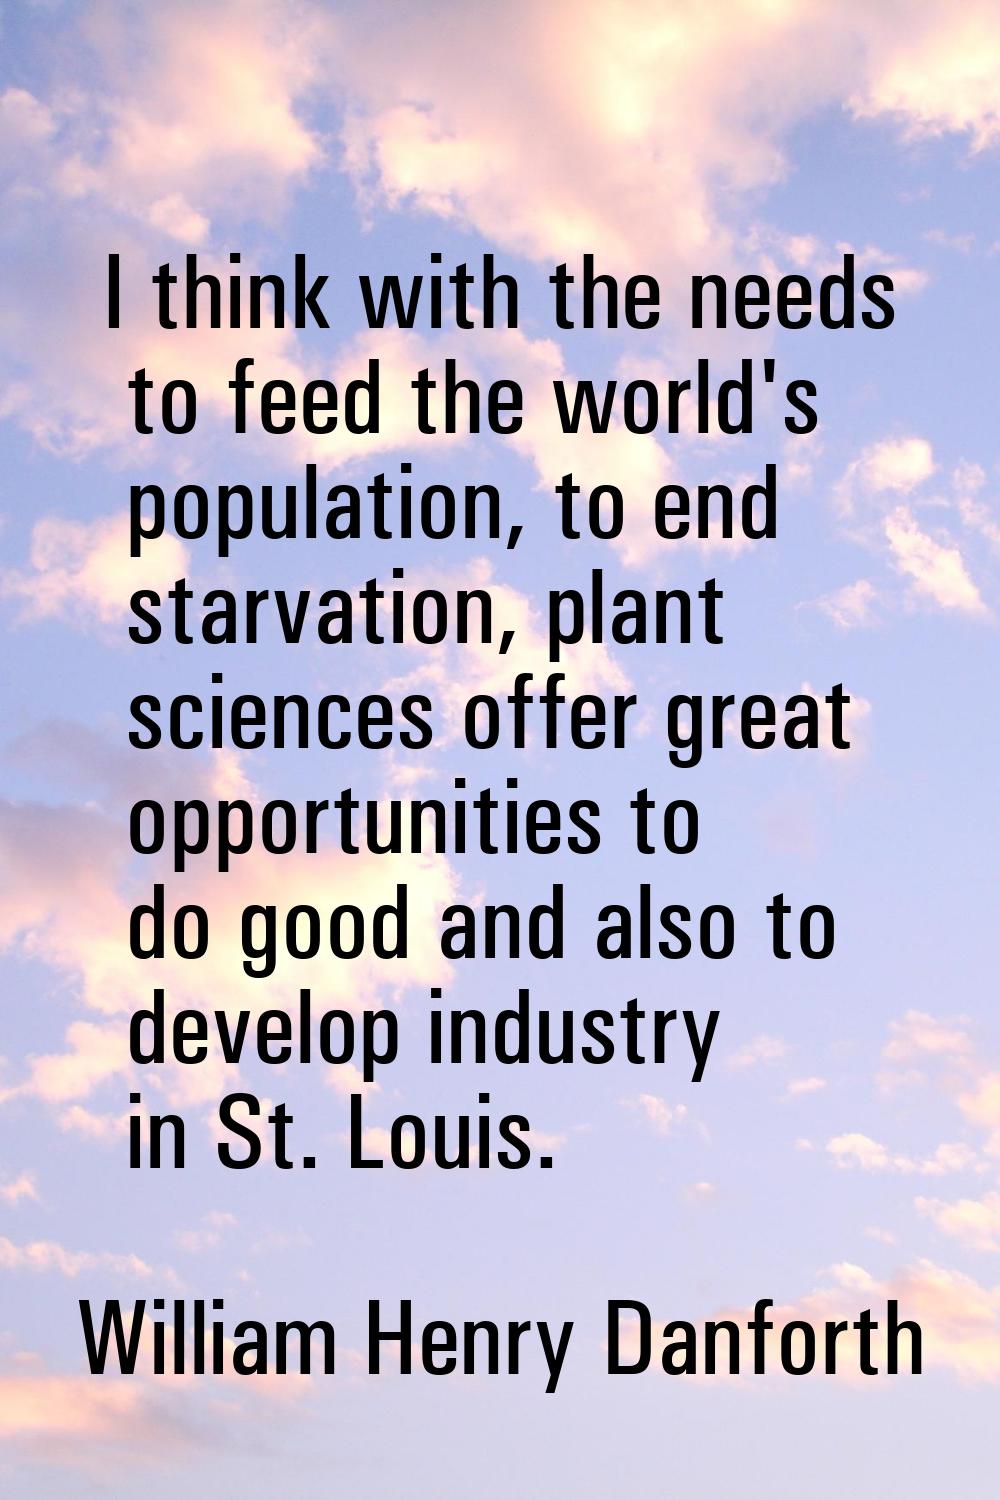 I think with the needs to feed the world's population, to end starvation, plant sciences offer grea